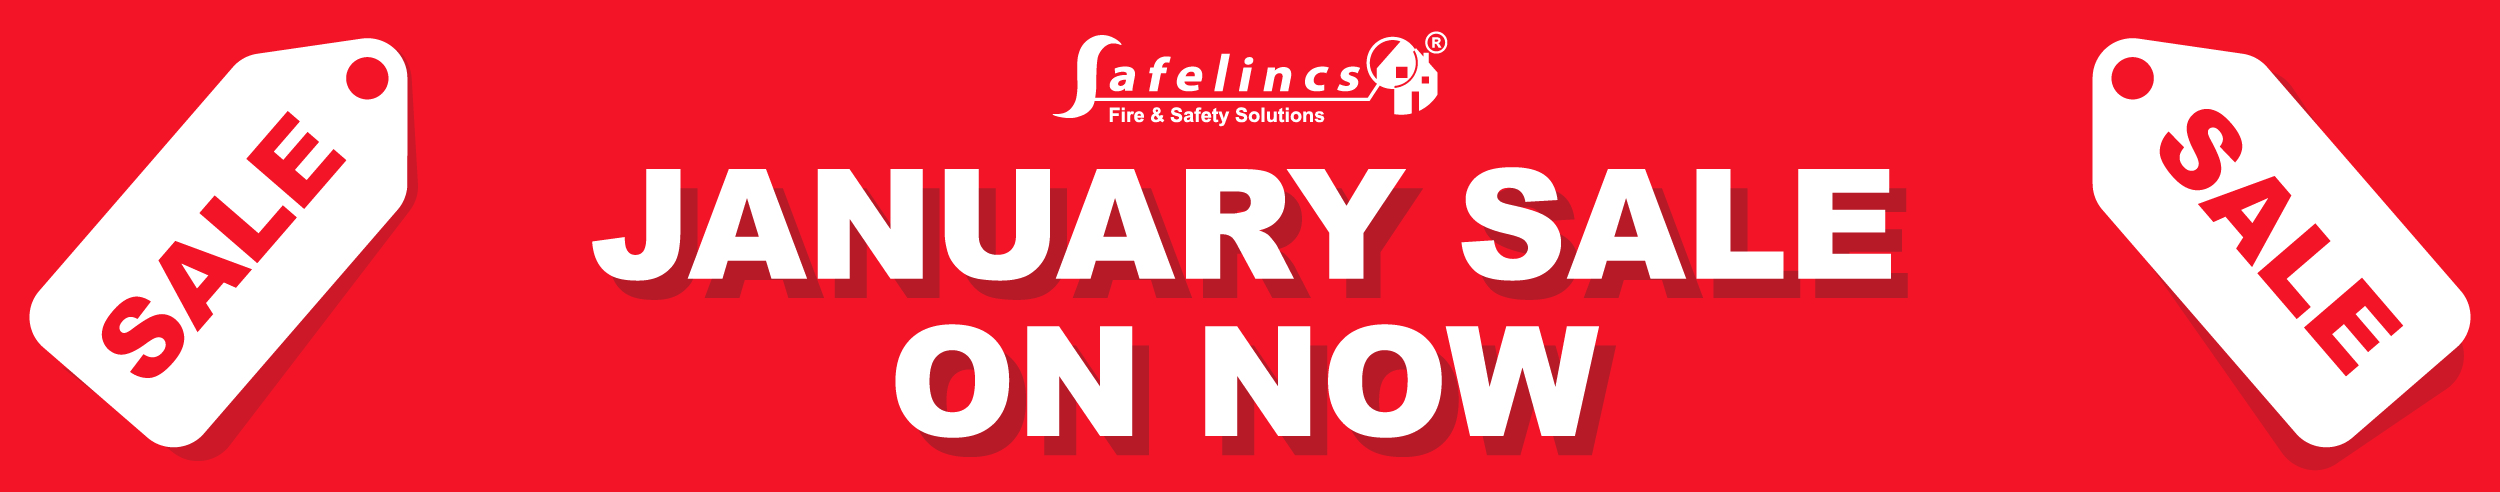 Explore Safelincs' January Sale fire and safety products for a limited time only